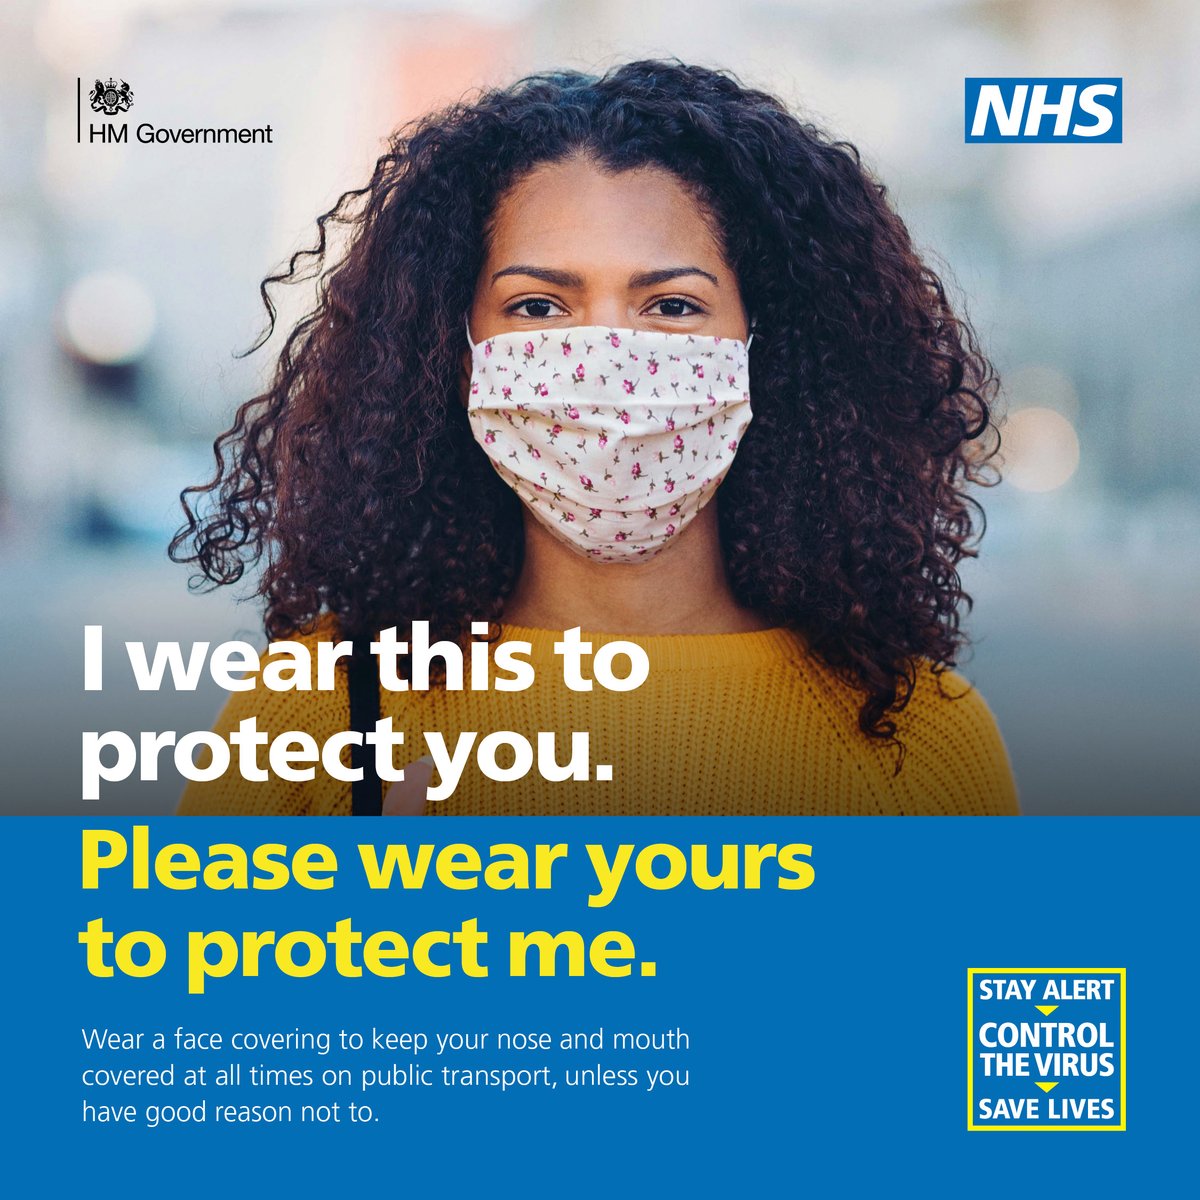 We want all patients to wear a mask at surgery